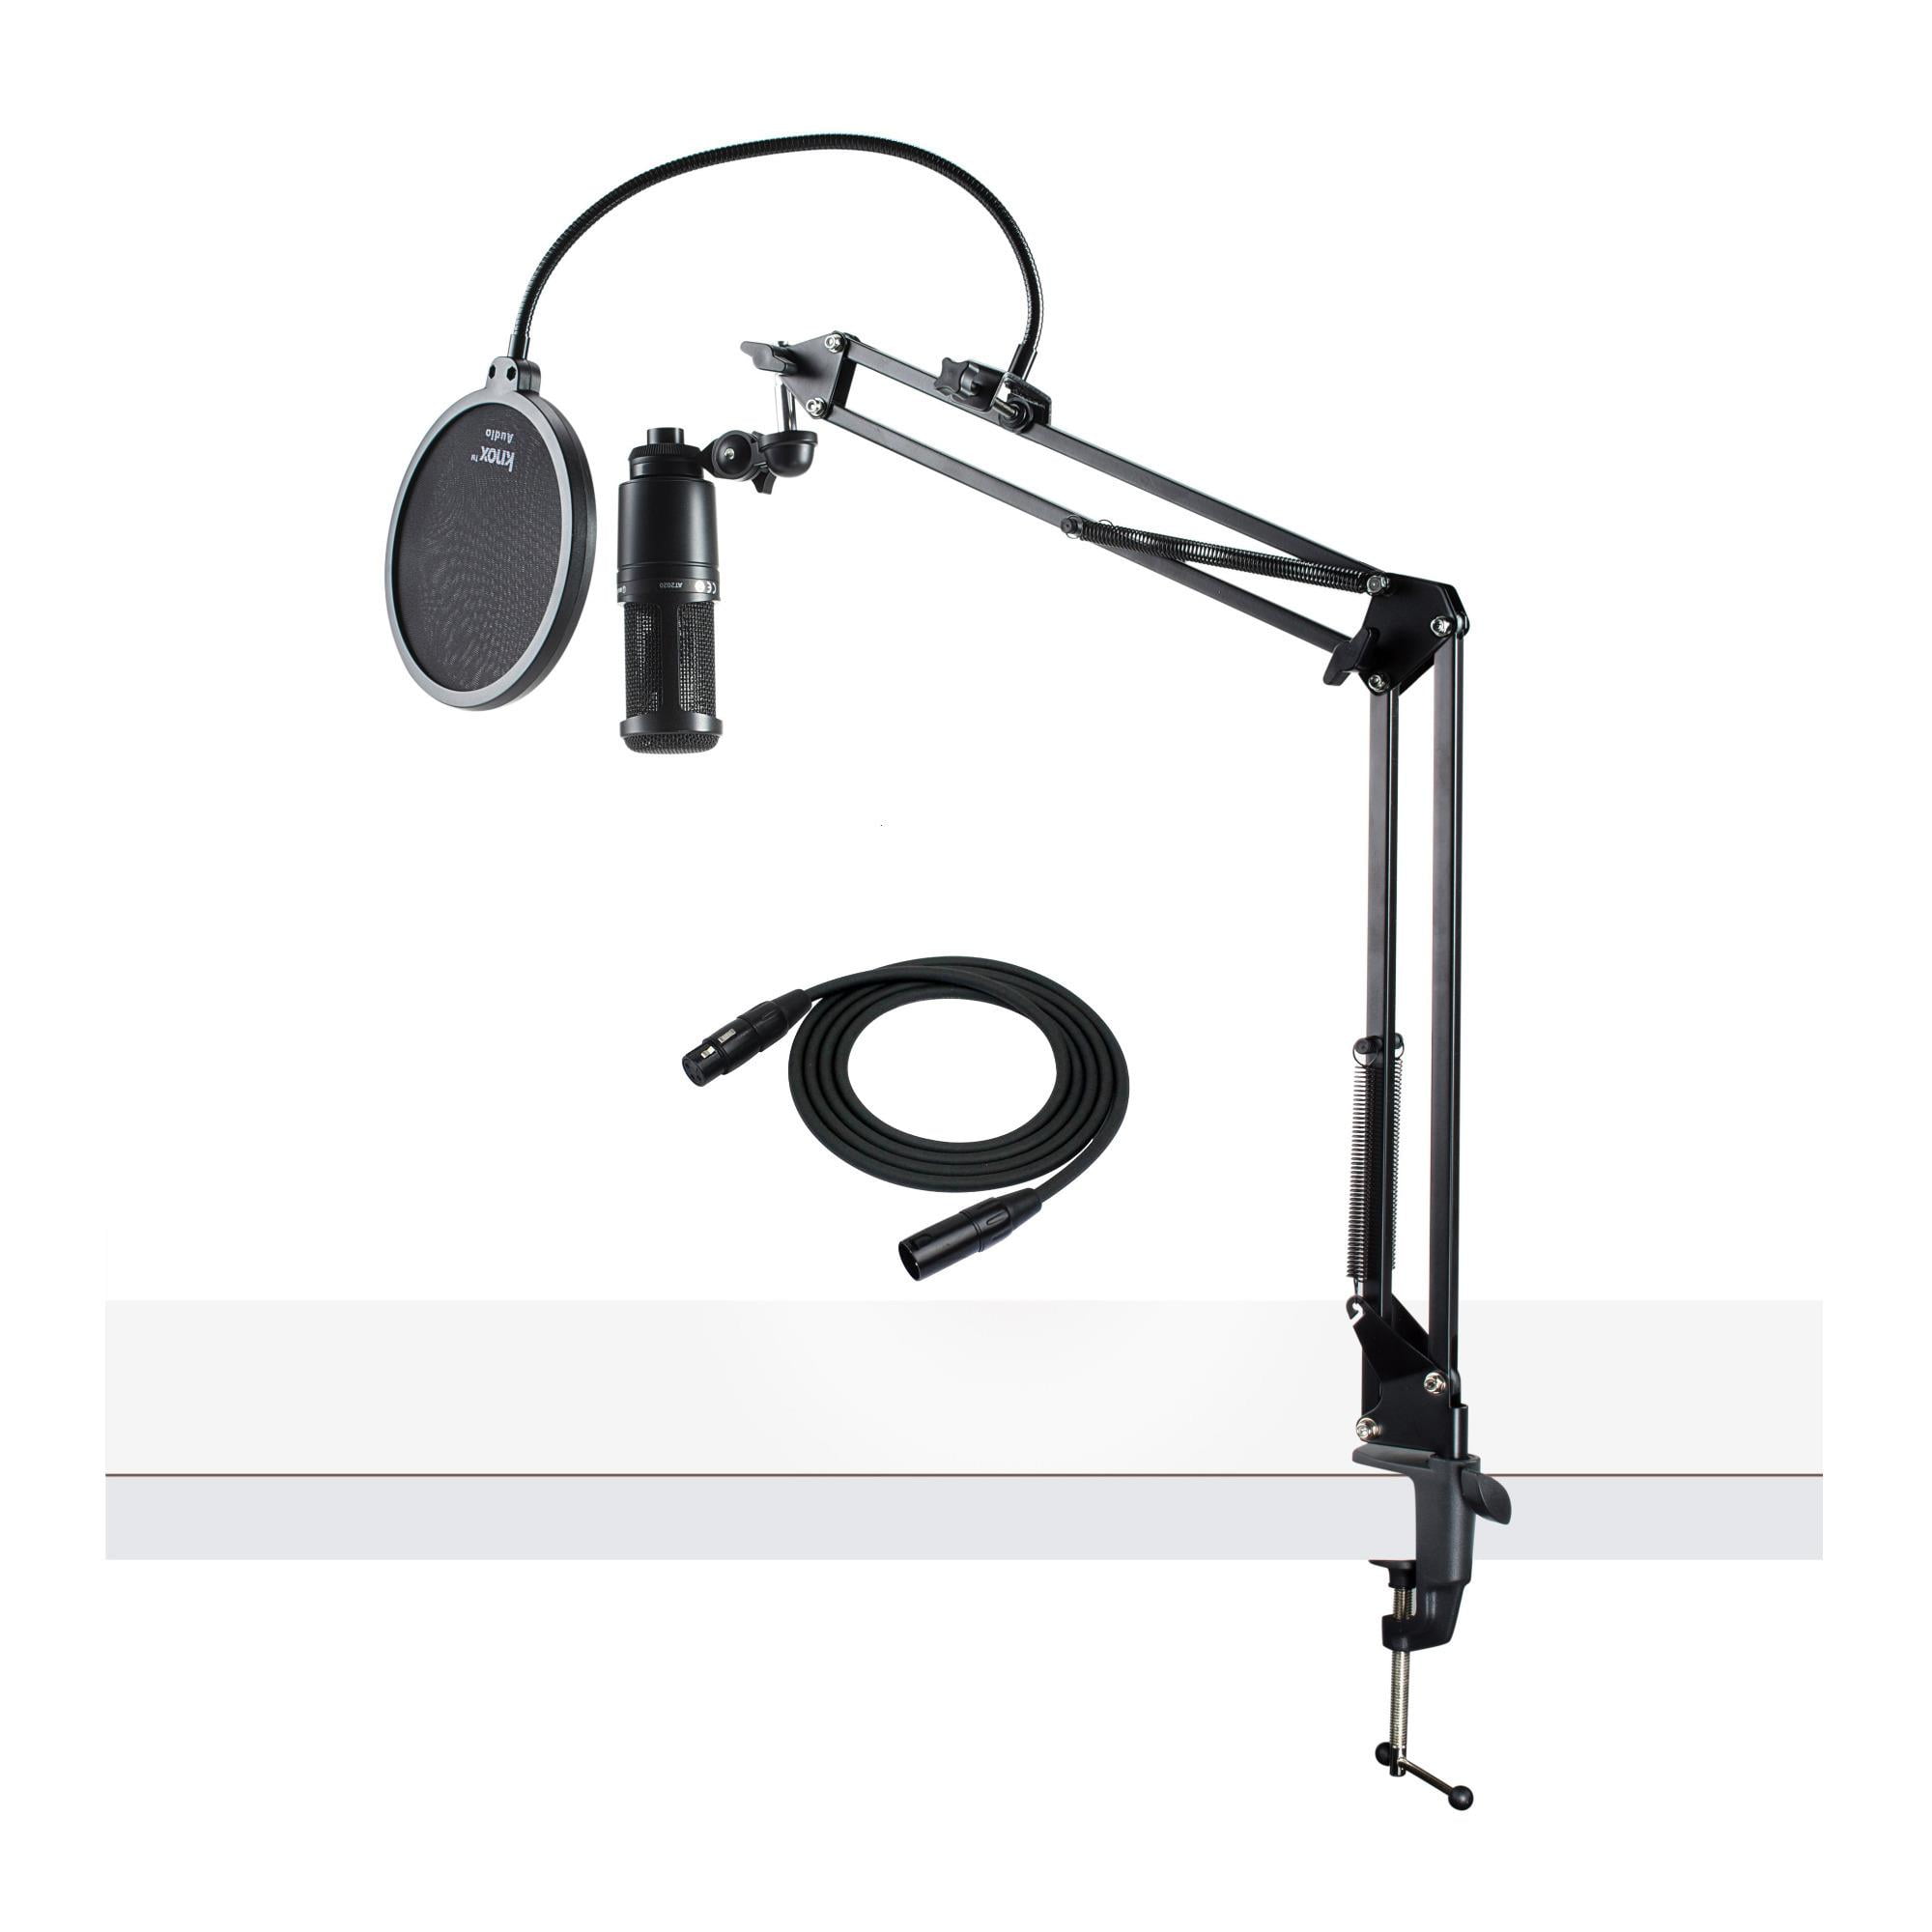 Audio-Technica AT2020 Condenser Studio Microphone with Knox Filter